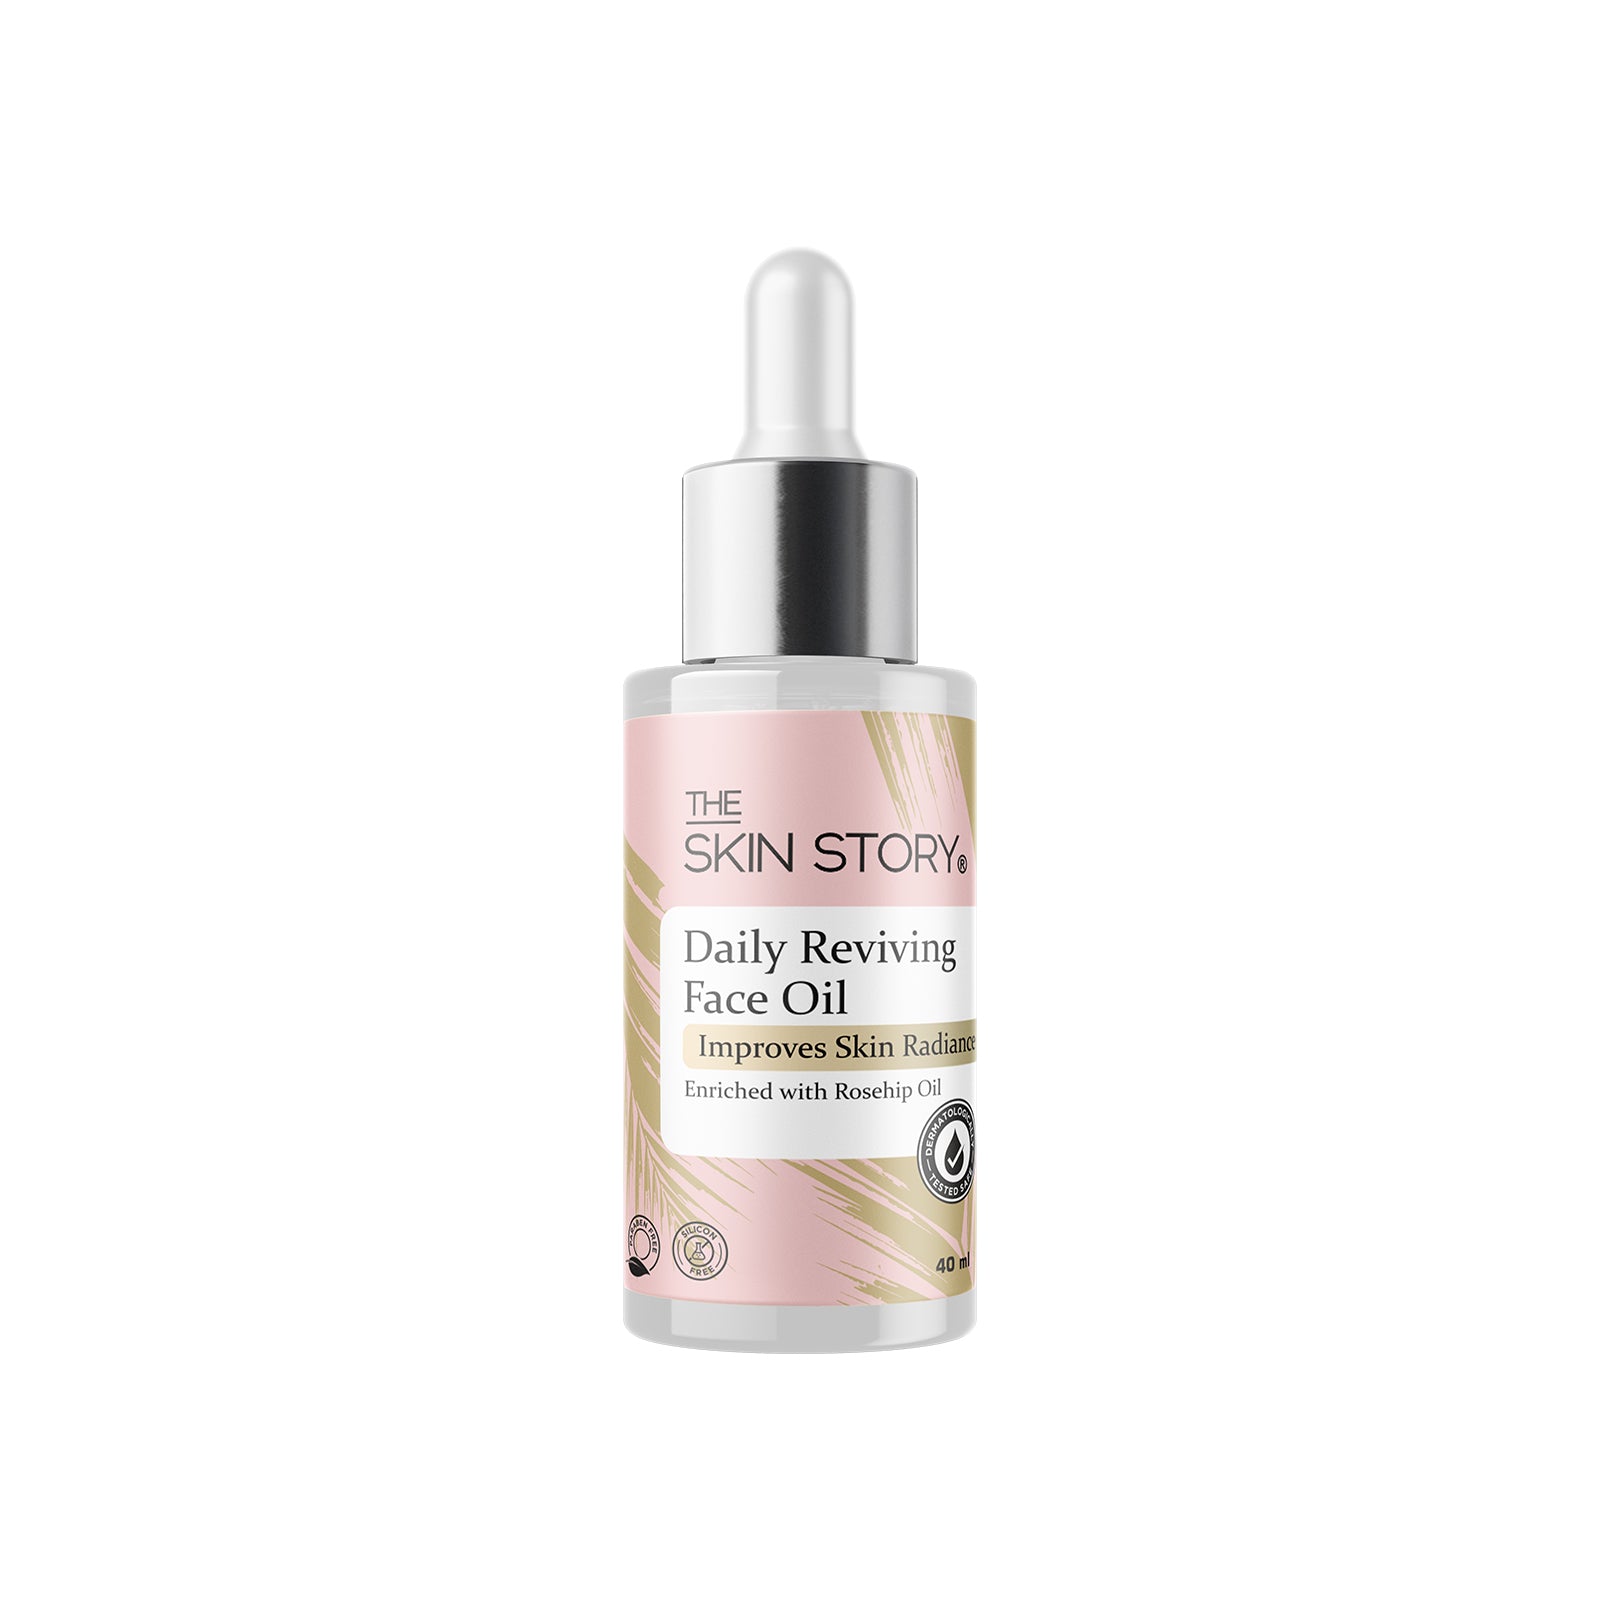 The Skin Story Replenishing Face Oil | Rose Hip & Pumpkin seed oil | Anti ageing face oil for women | Daily Use | Dermatologically Tested | 40ml